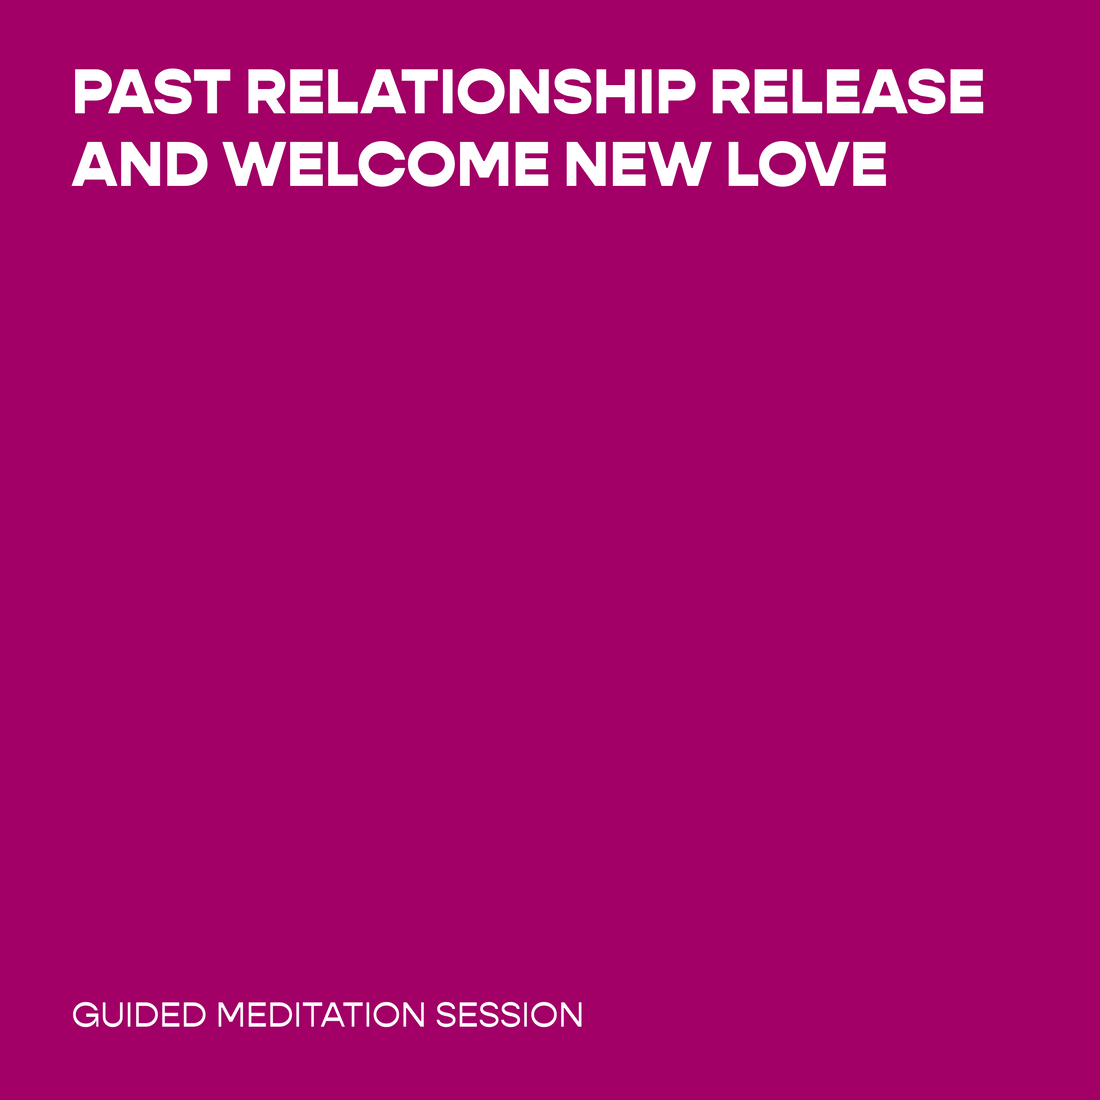 Past Relationship Release and Welcome New Love